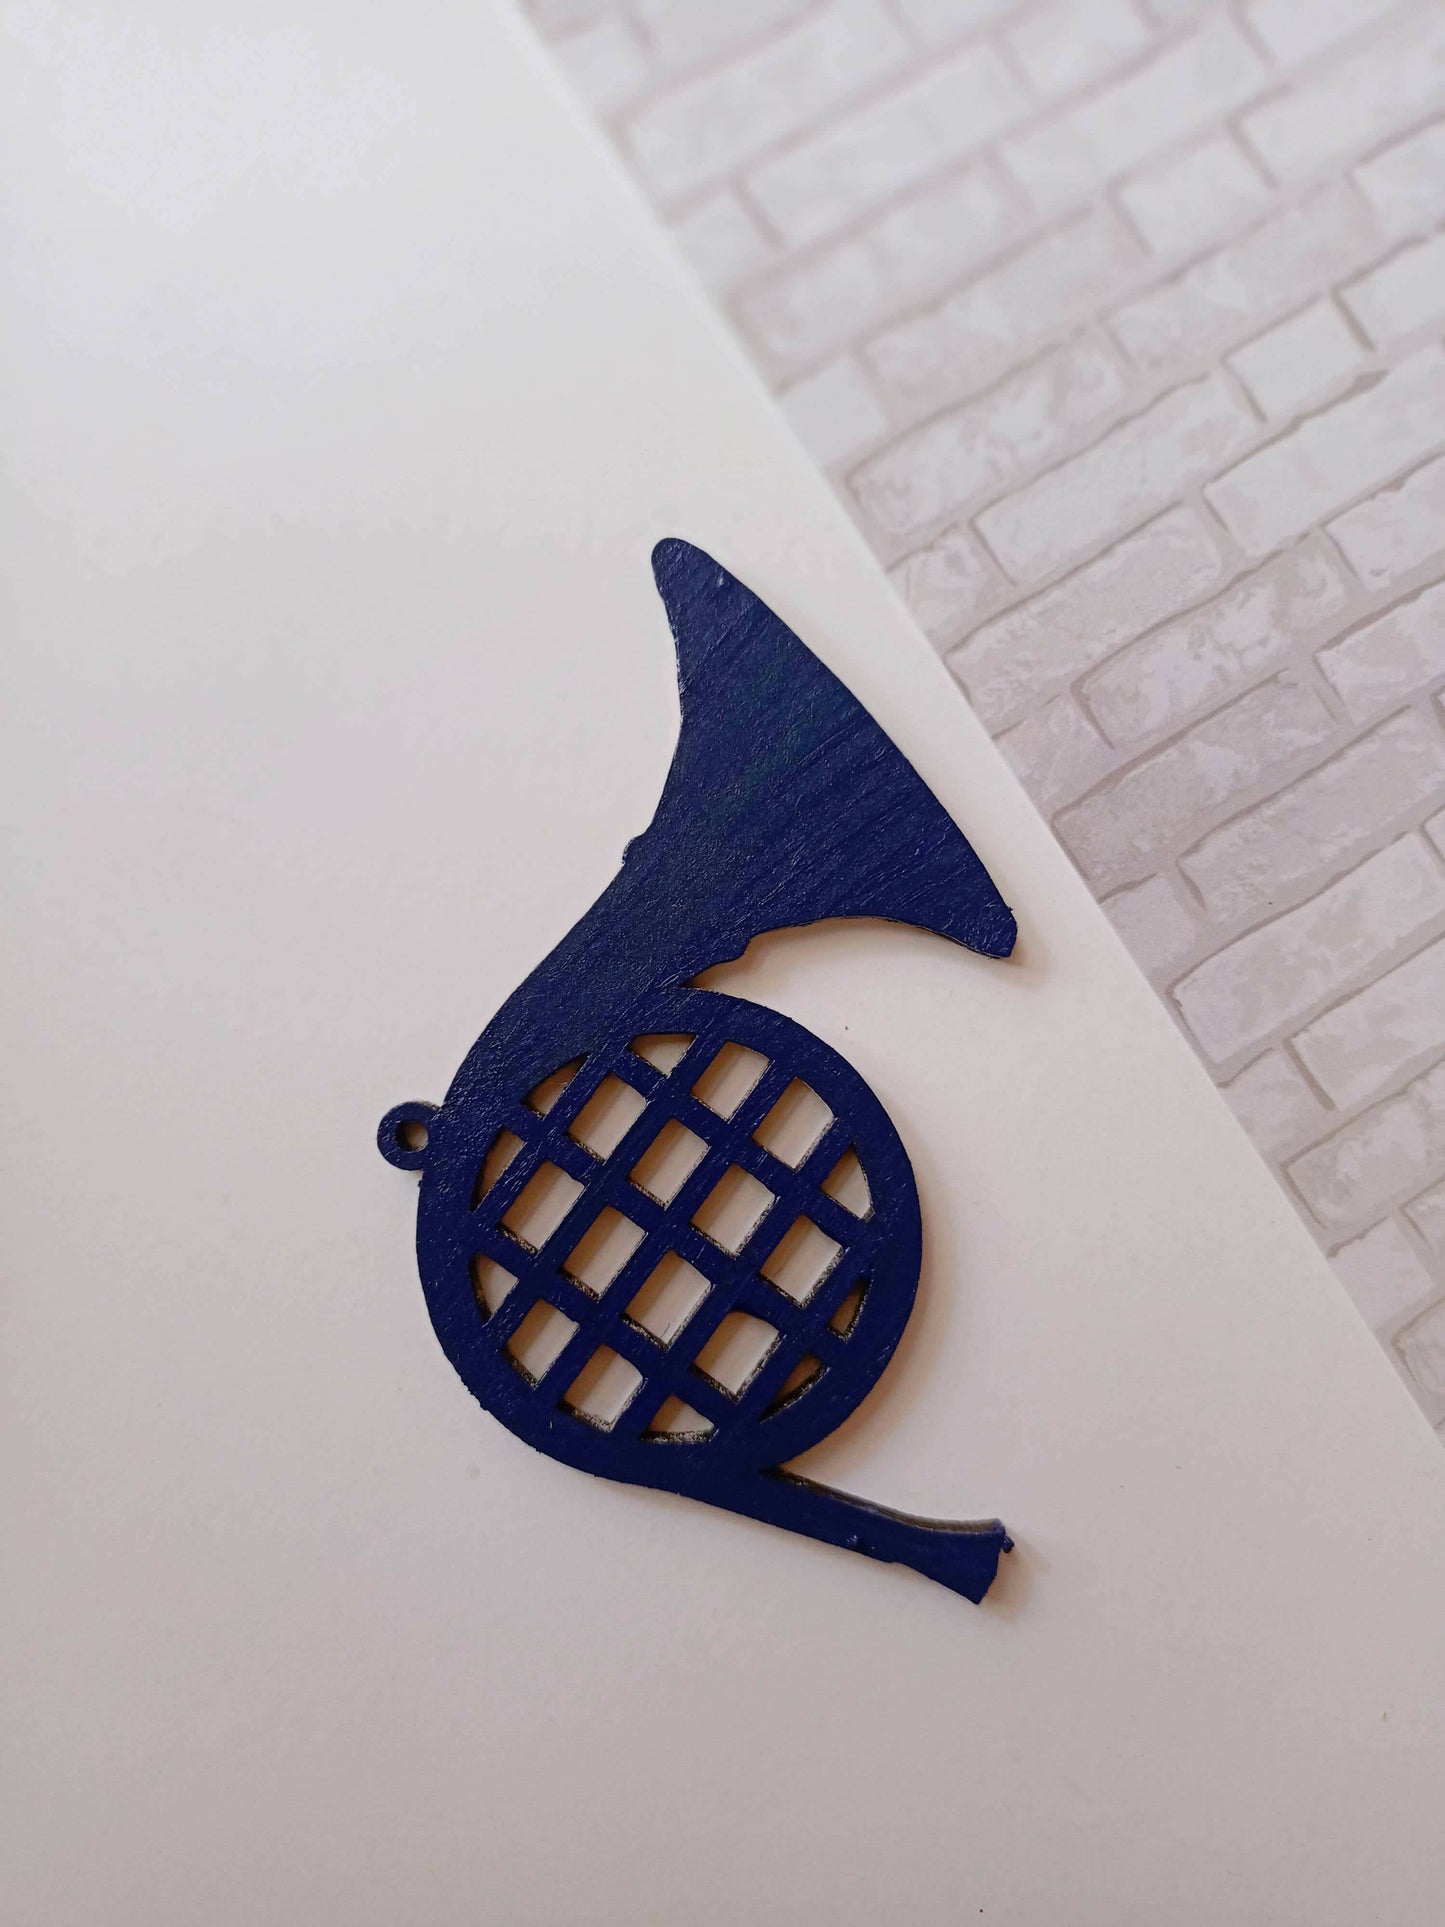 How I met your mother Blue french horn keychain (MDF base)